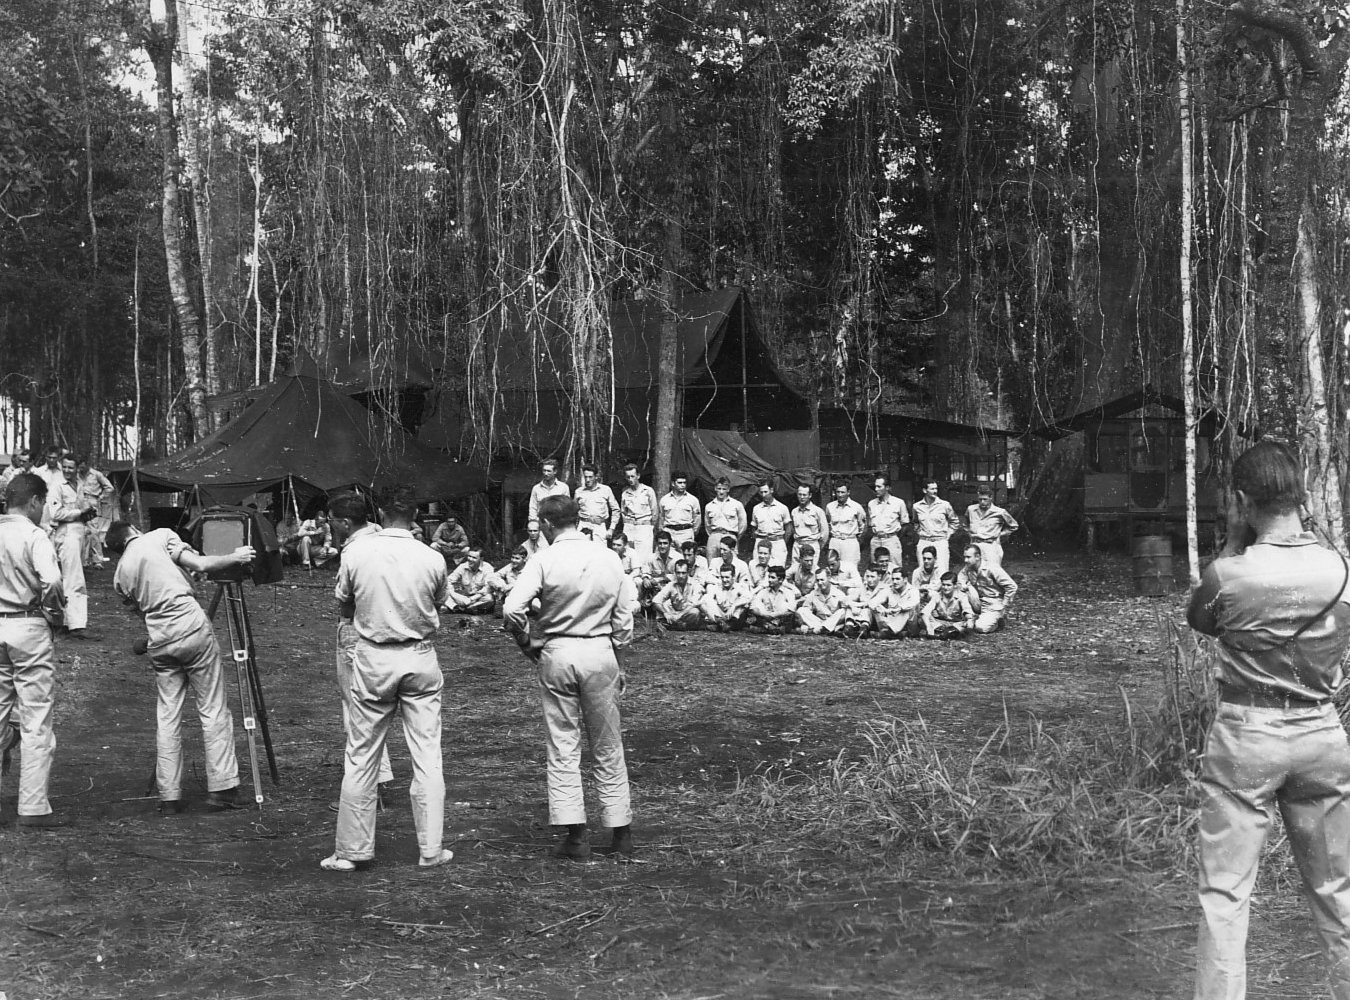 Preparing for a group shot of the airmen of 13th Bomb Squadron of USAAF 3rd Bomb Group, Dobodura Airfield, Australian Papua, mid-1943